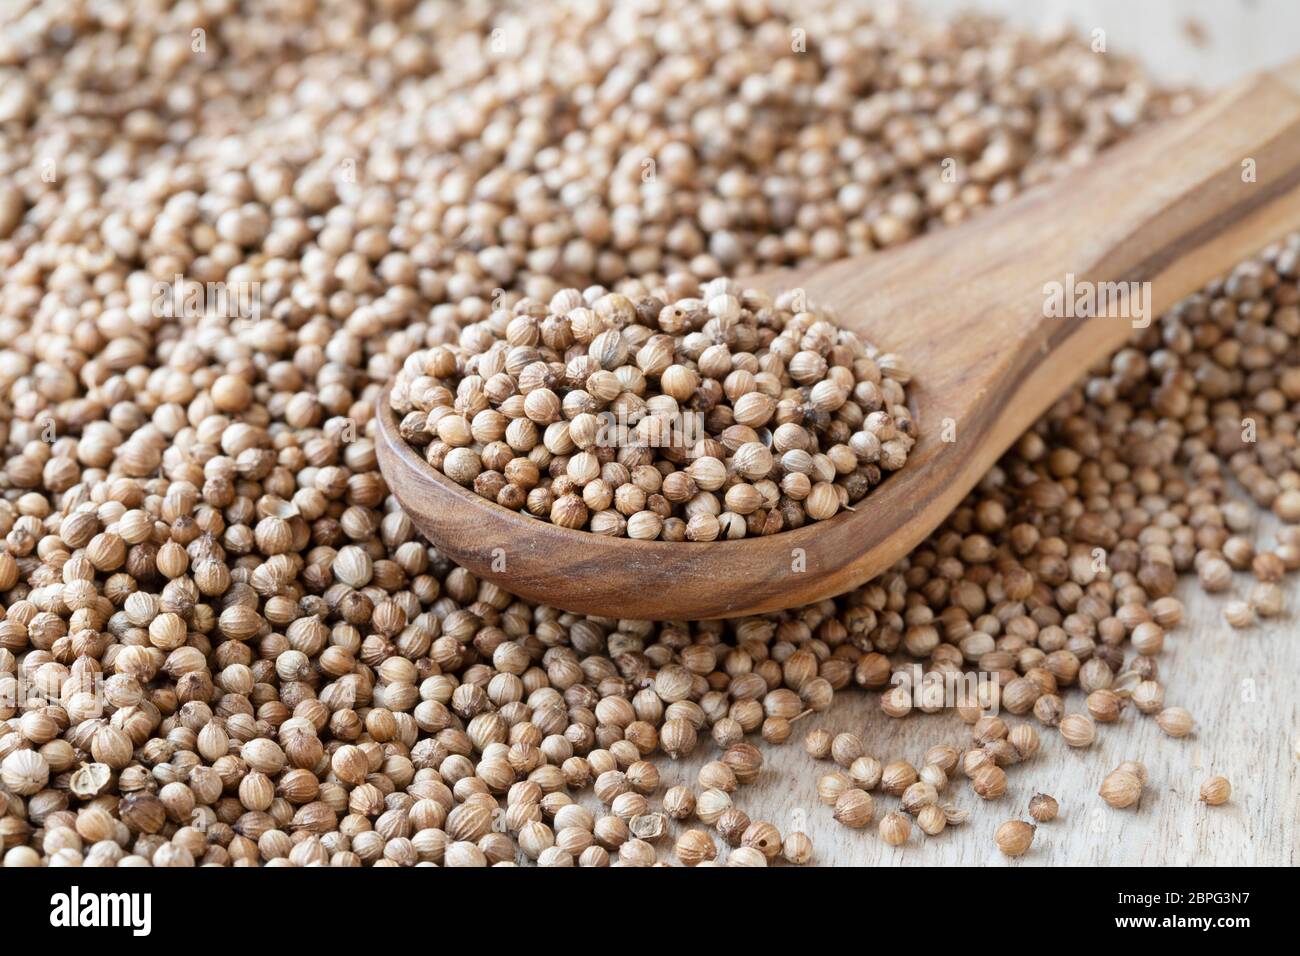 Wooden spoon full of whole coriander seeds Stock Photo